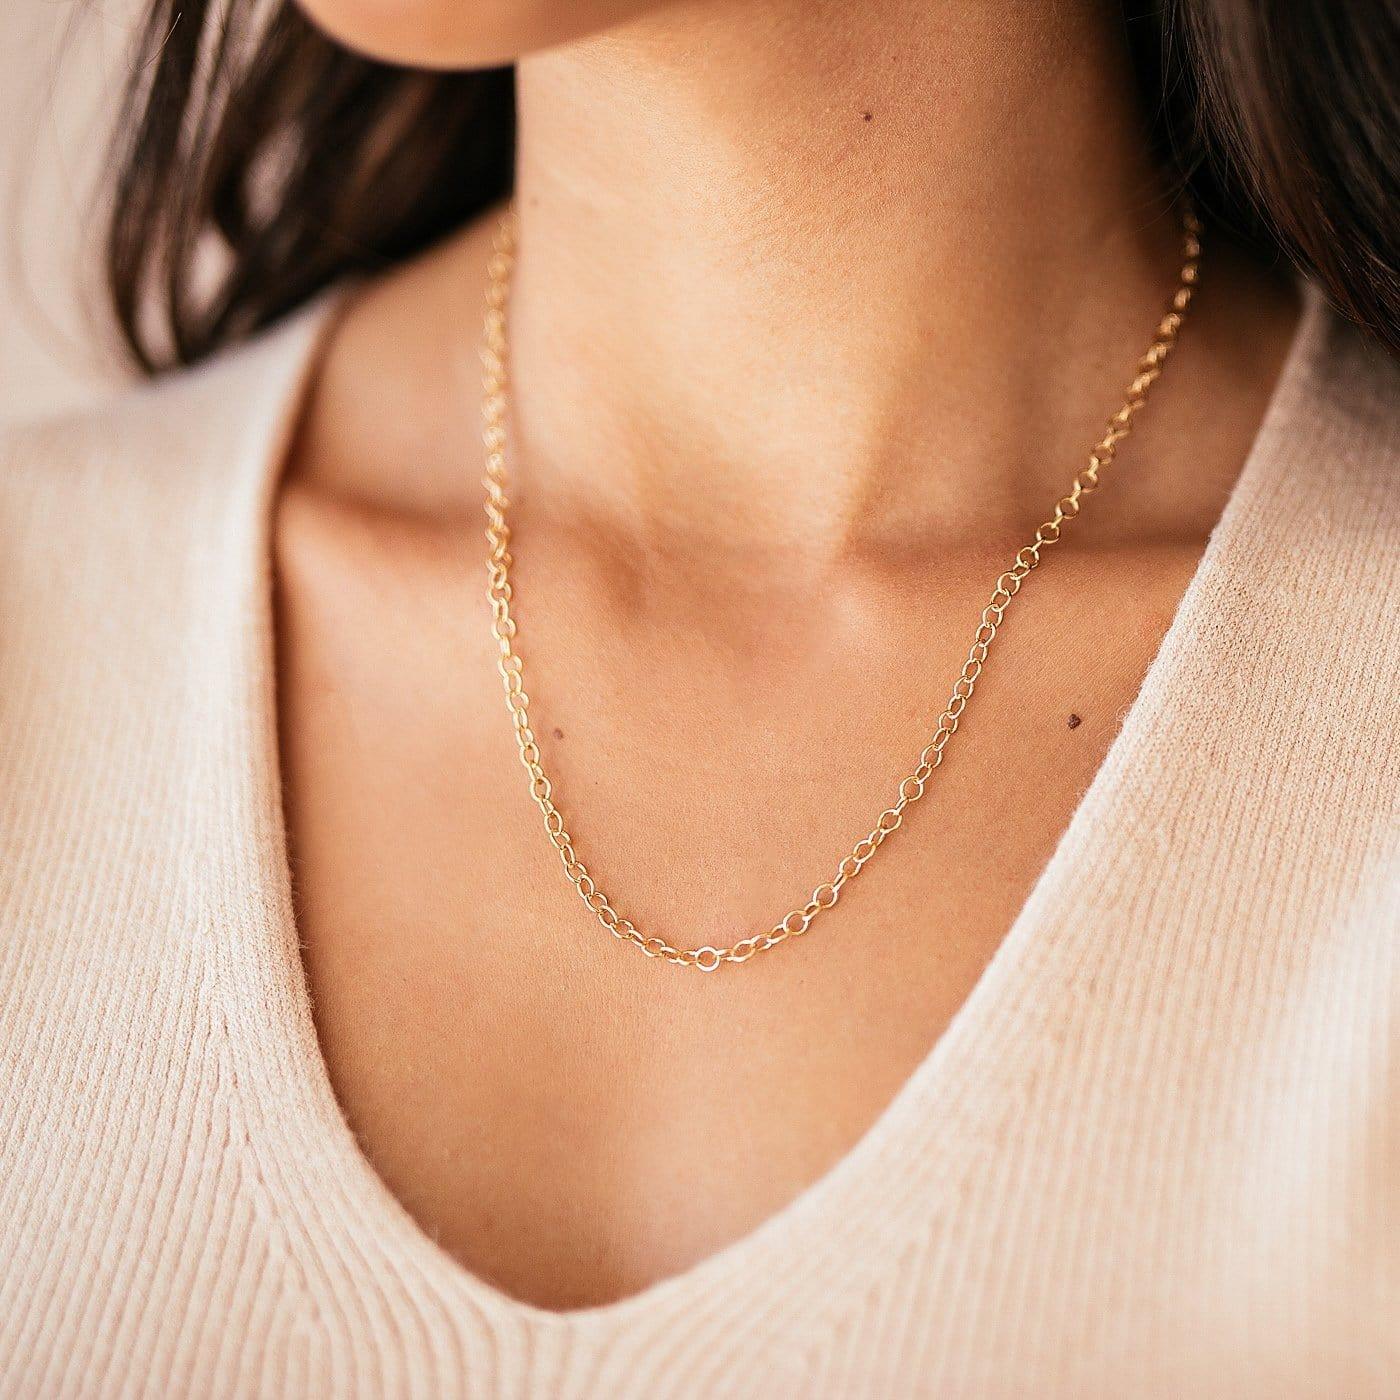 Vogue Chain Necklace - Nolia Jewelry - Meaningful + Sustainably Handcrafted Jewelry